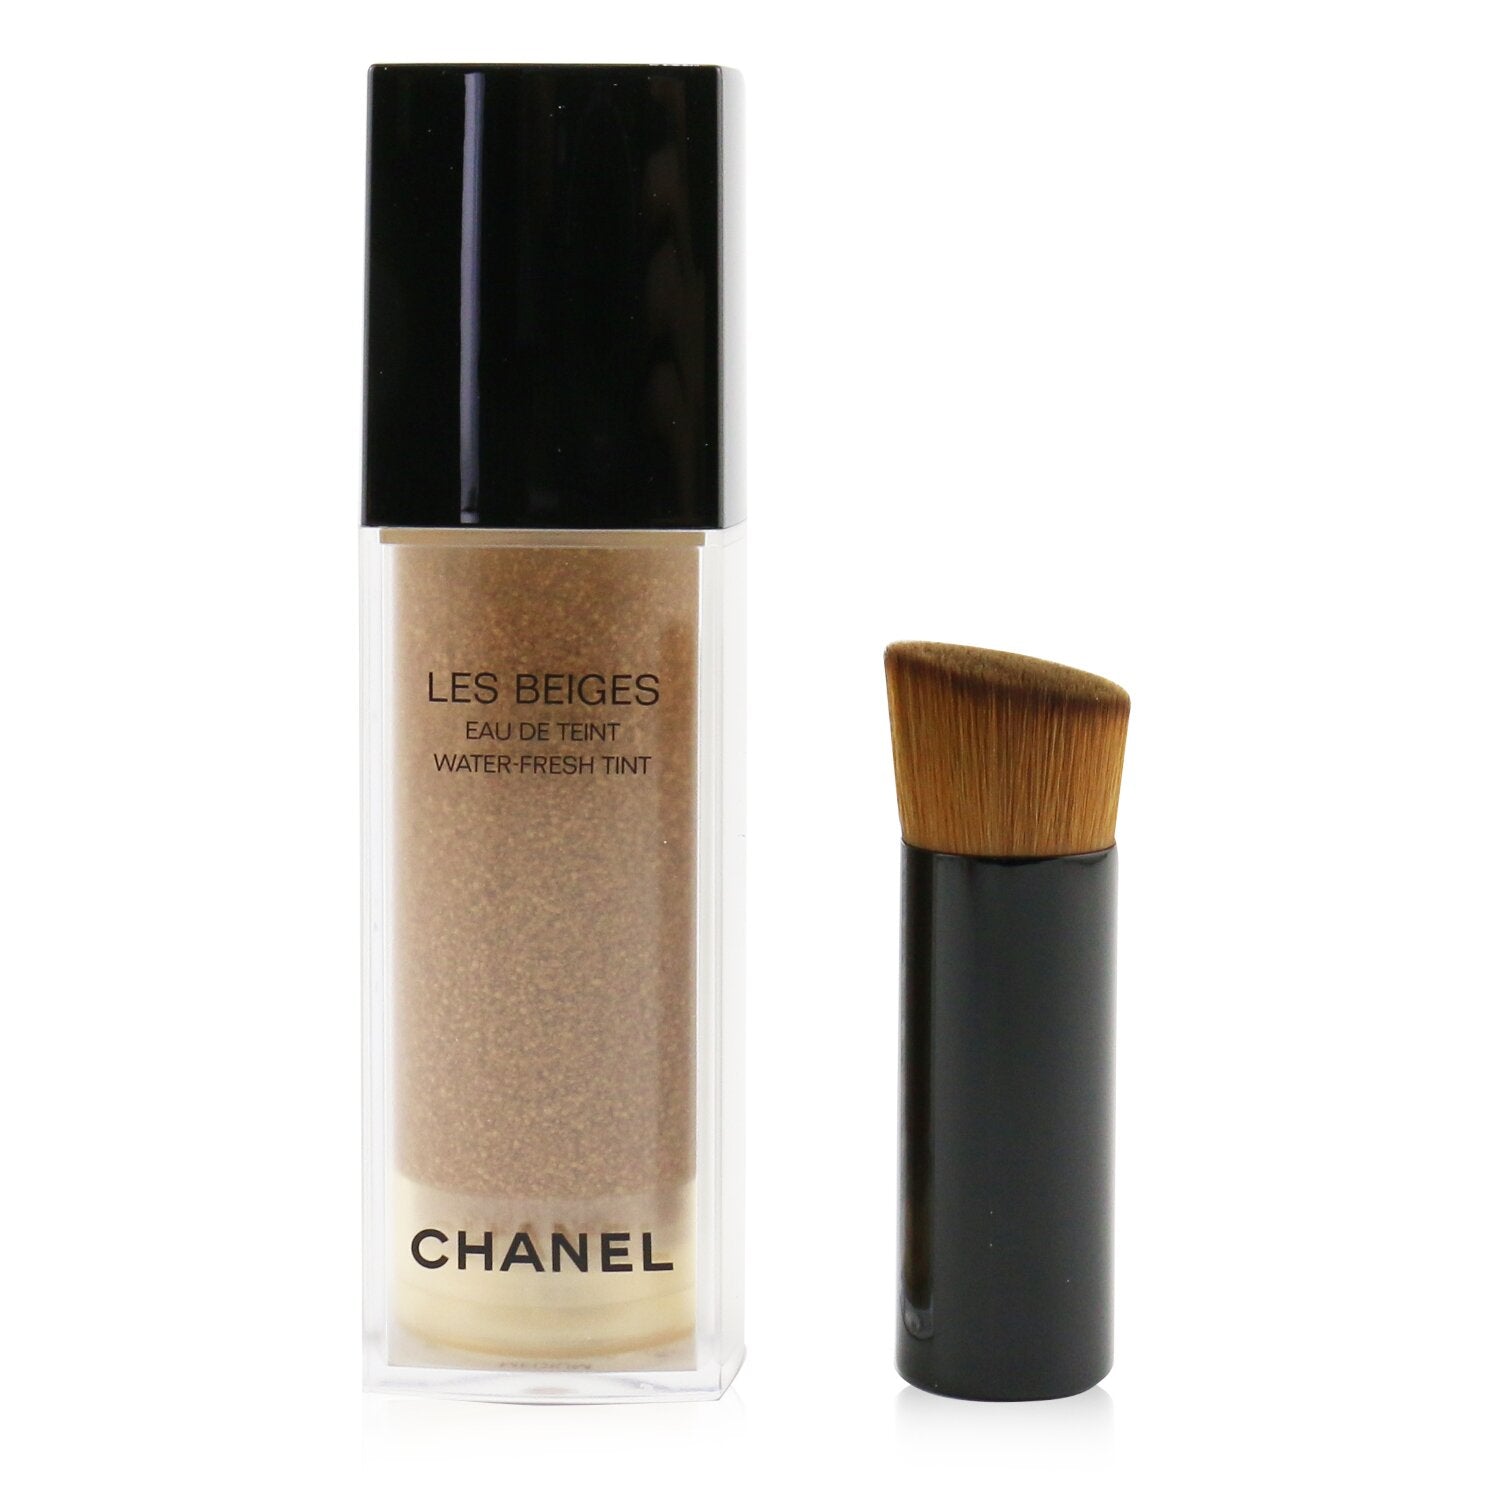 Chanel Les Beiges Water Fresh Tint Foundation - Shade Light